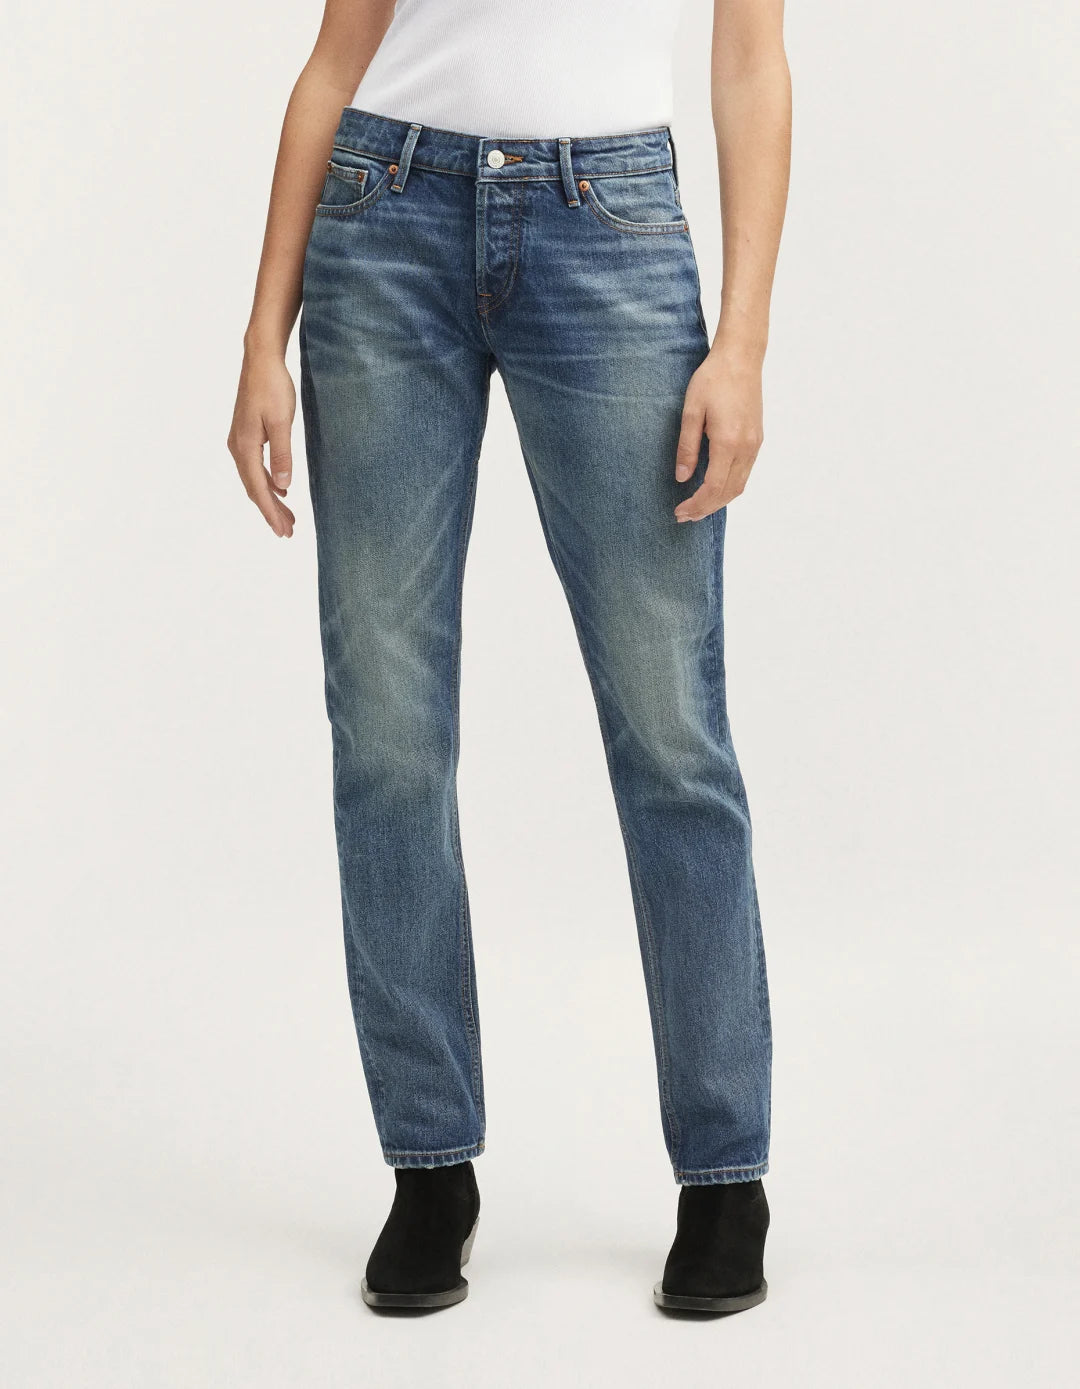 Girlfriend style jeans in a mid blue wash